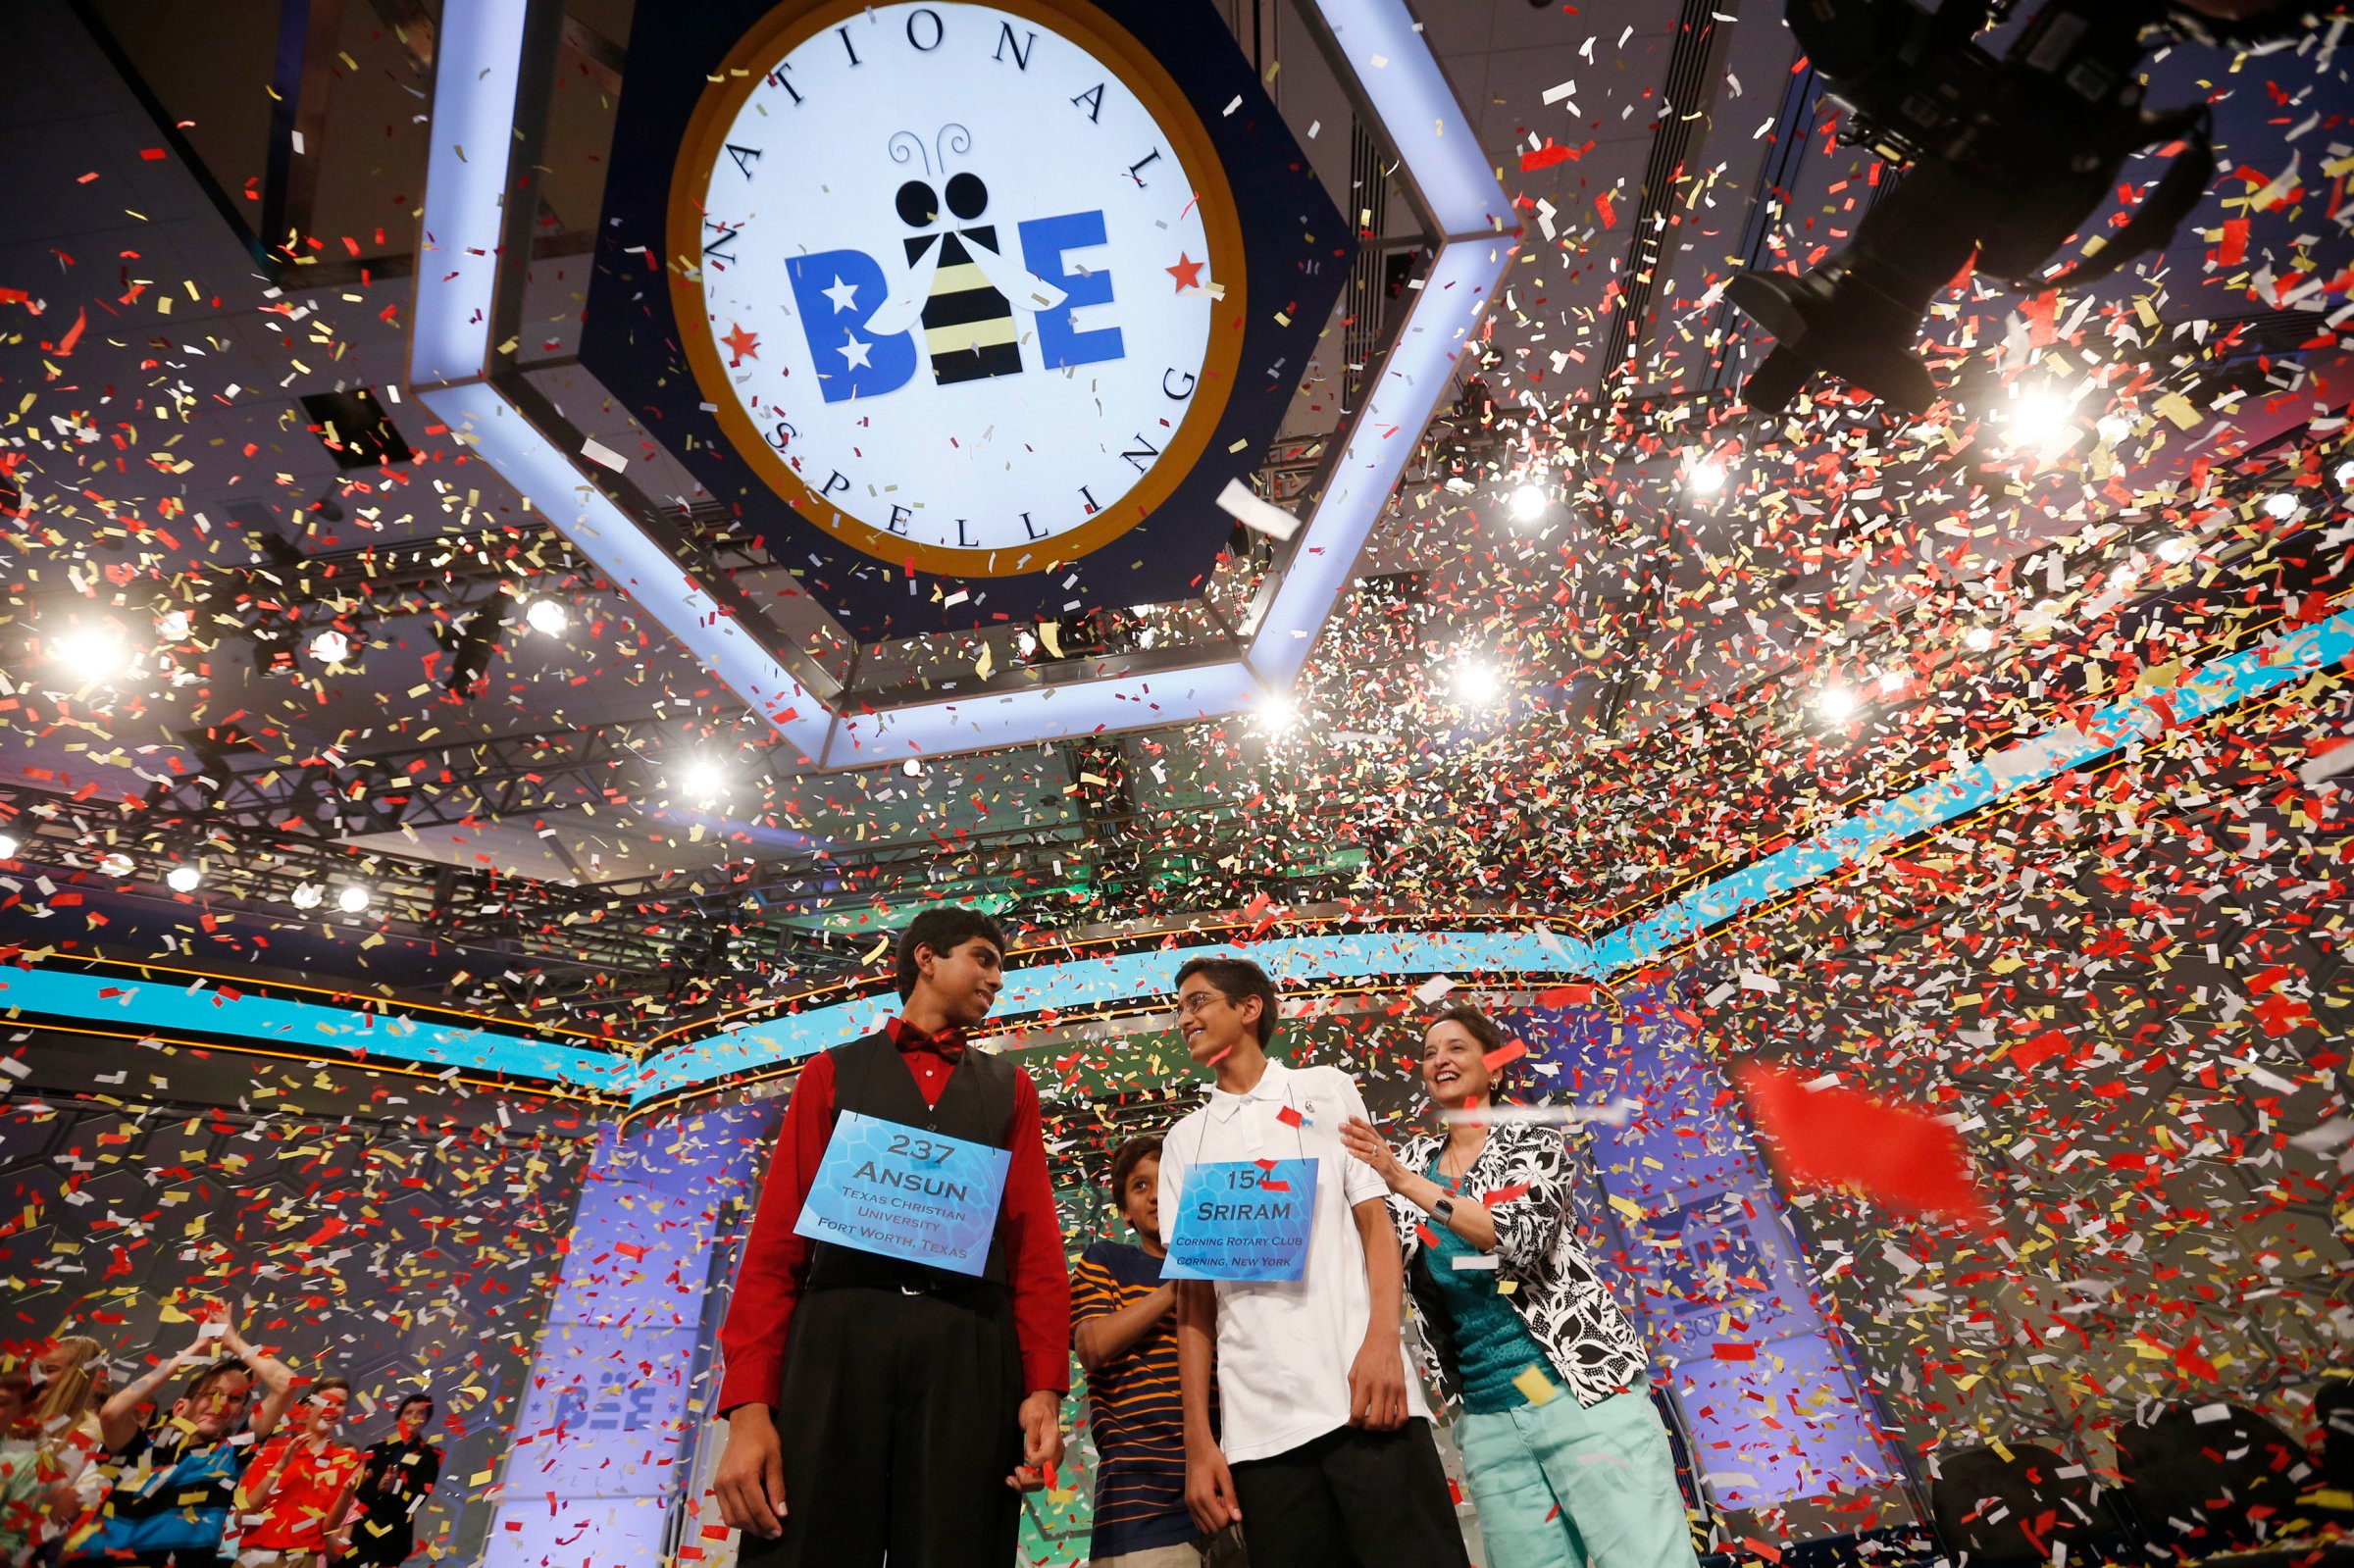 Hathwar stands next to his mother as he and Sujoe are joint winners of the 87th annual Scripps National Spelling Bee at National Harbor